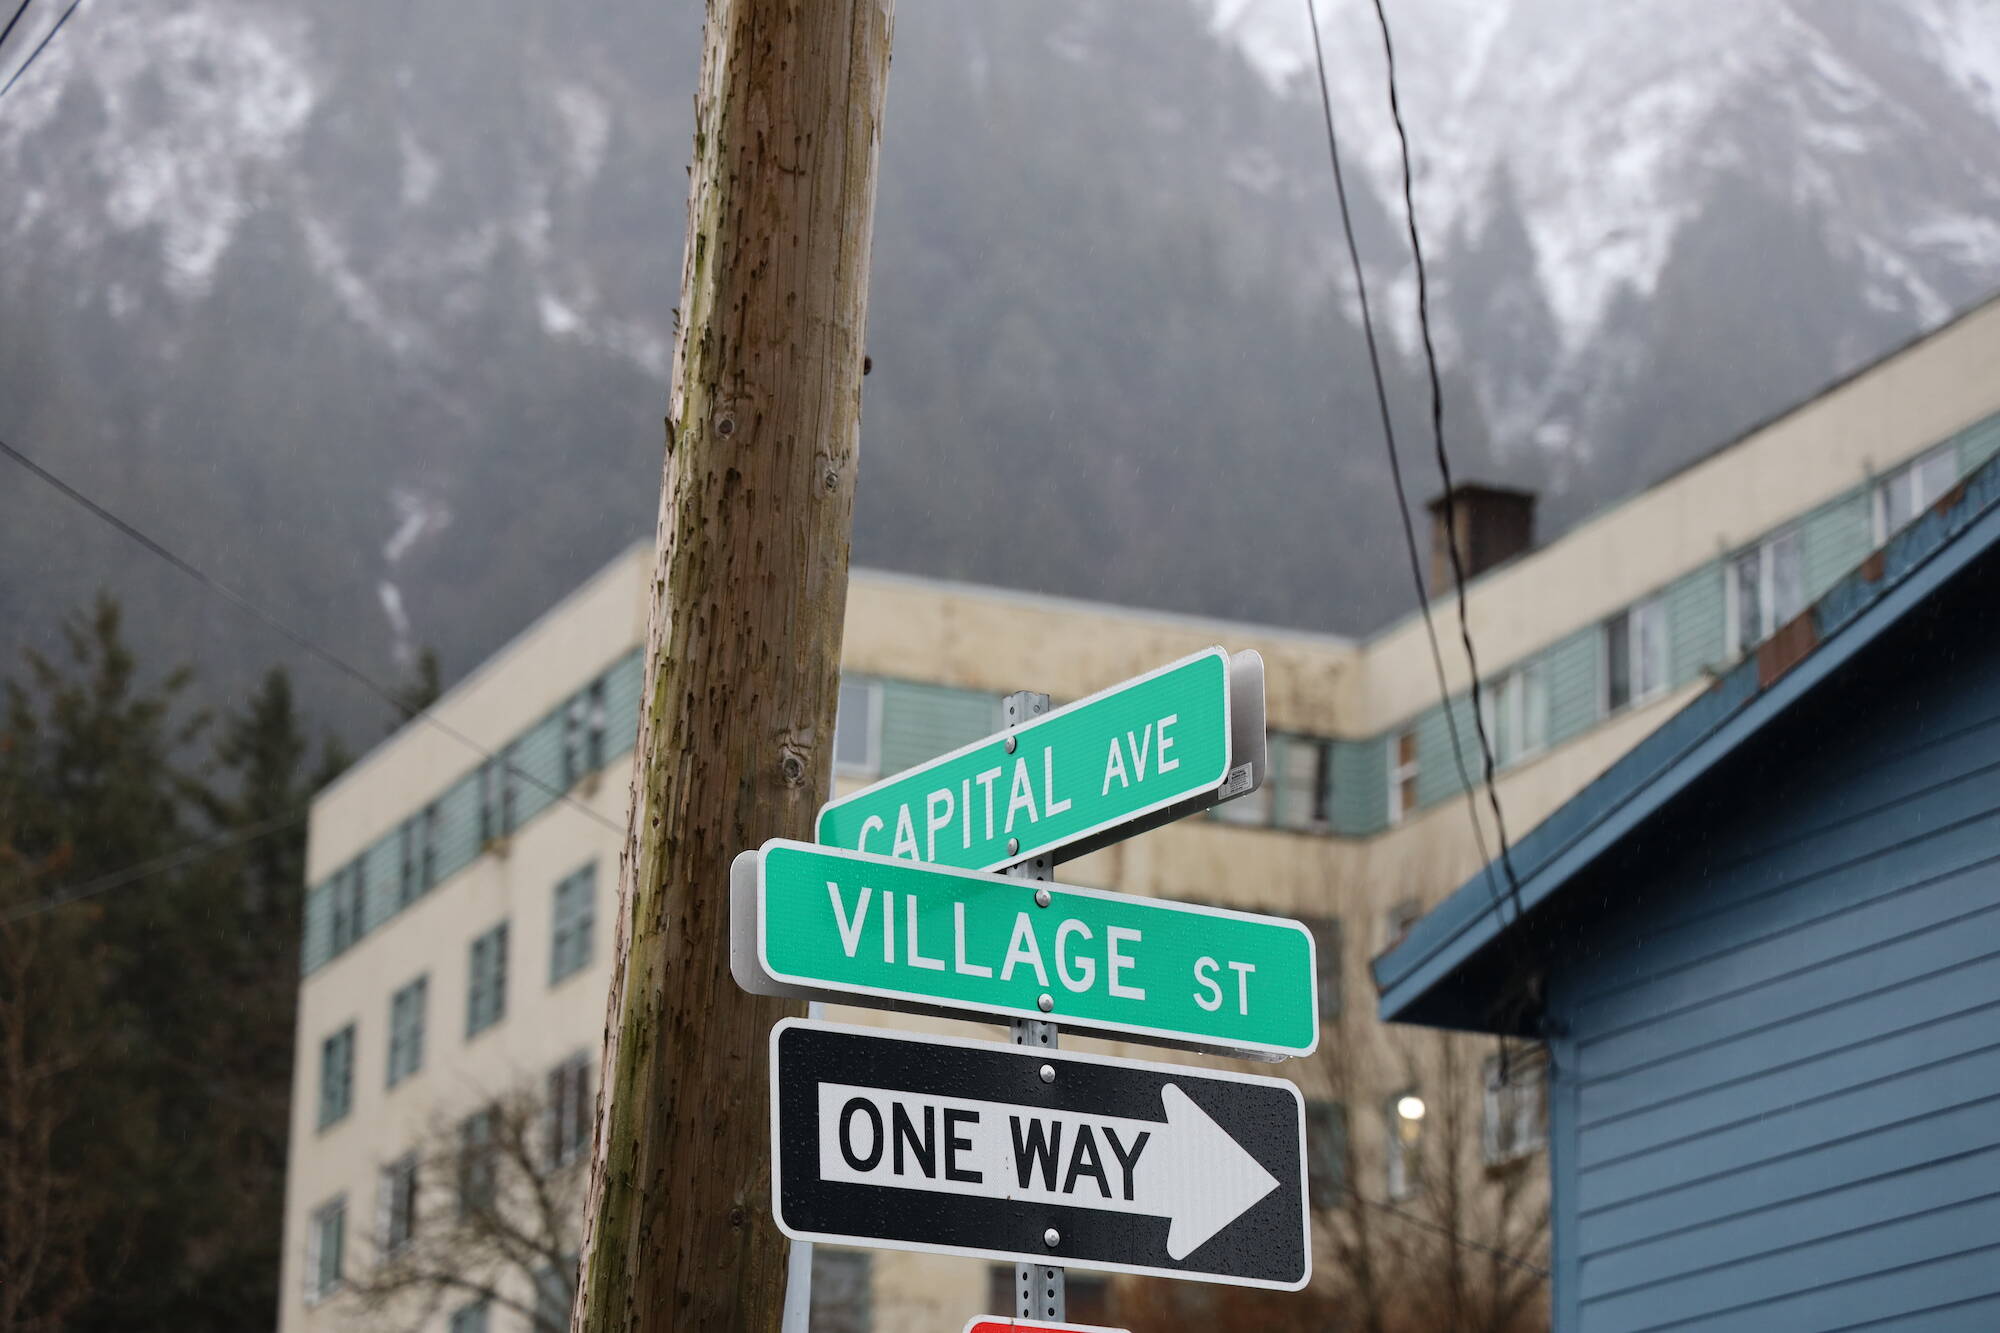 A parcel of land just off the corner of Capital Ave. and Village Street in downtown Juneau was approved to be the first parcel of land owned by the Central Council of the Tlingit and Haida Indian Tribes of Alaska to be put into federal trust, however, the state of Alaska filed a lawsuit against the federal government and asked the U.S. District Court of Alaska to reverse the federal government’s decision, return the land to Tlingit and Haida and stop future land-into-trust applications. (Clarise Larson / Juneau Empire)